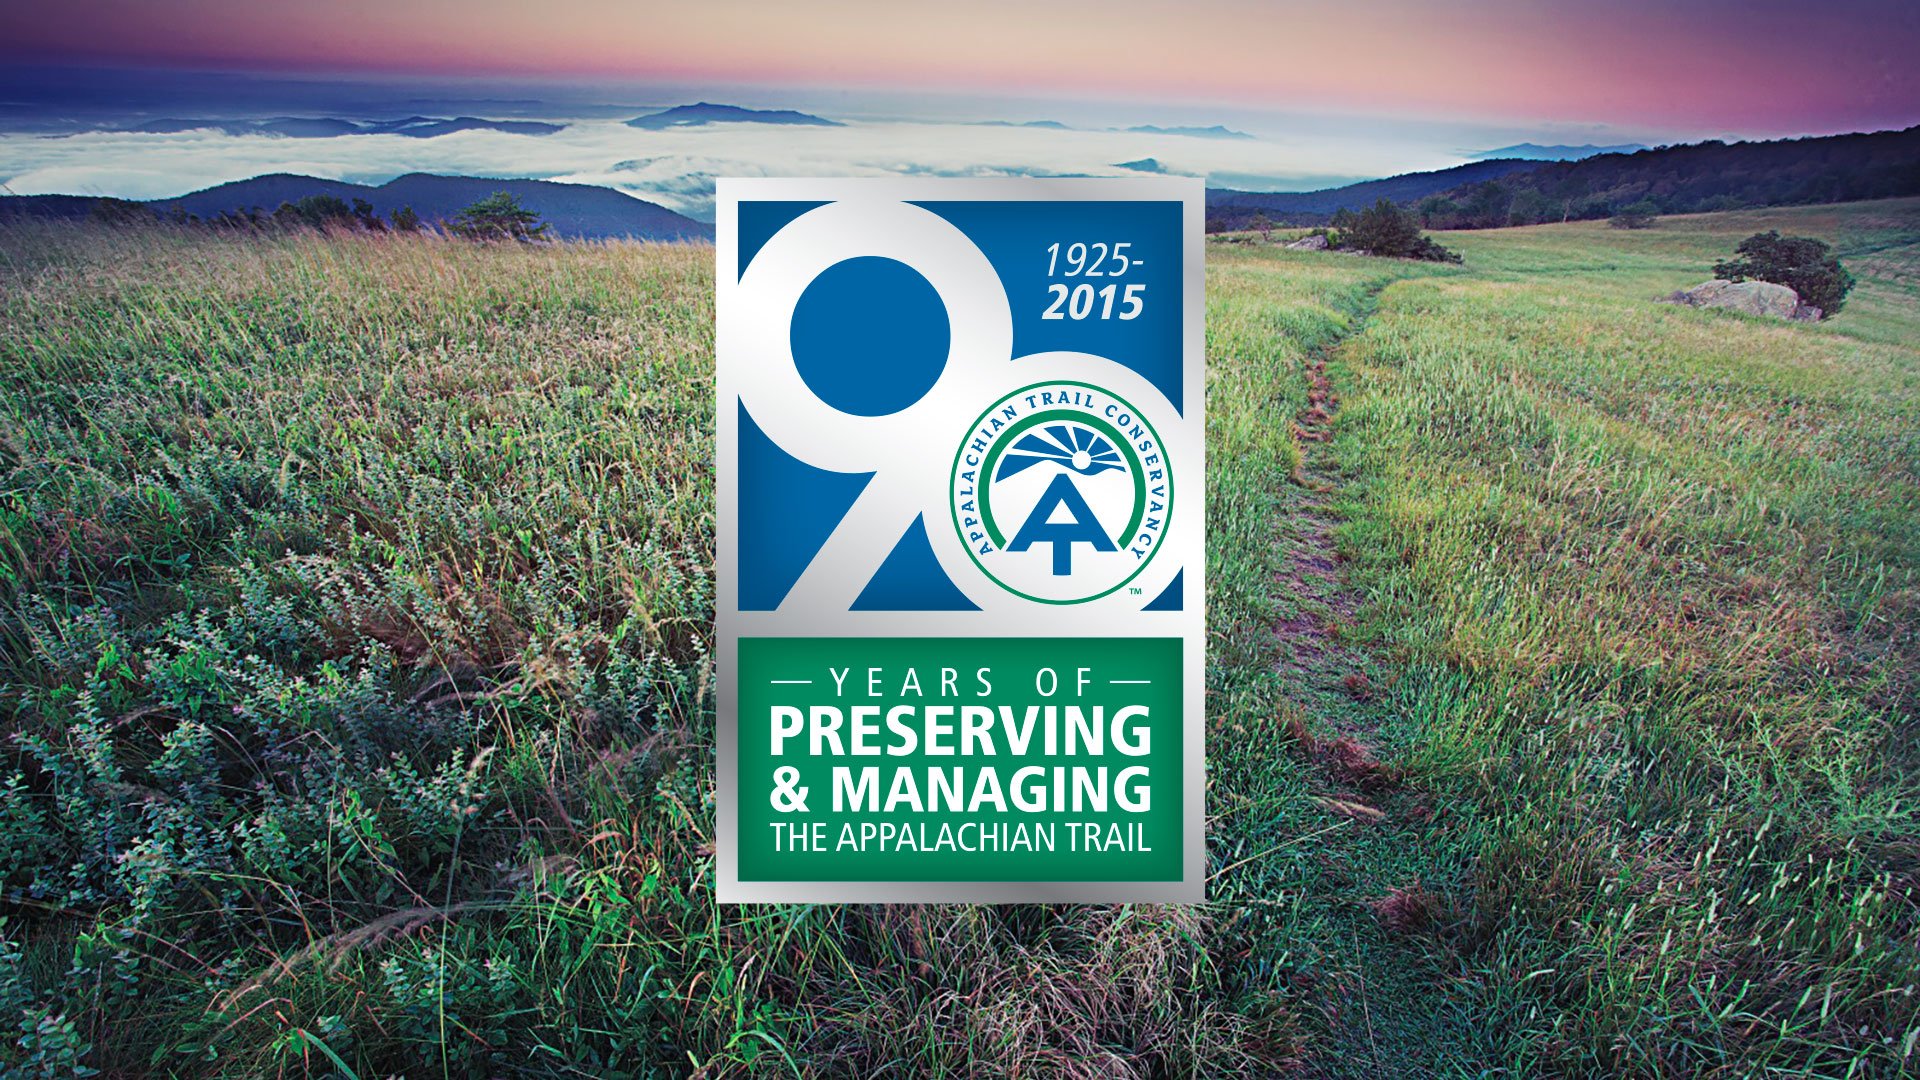 The Appalachian Trail Conservancy celebrated 90 years of preserving and managing the A.T. in 2015. Photo by Brent McGuirt Photography